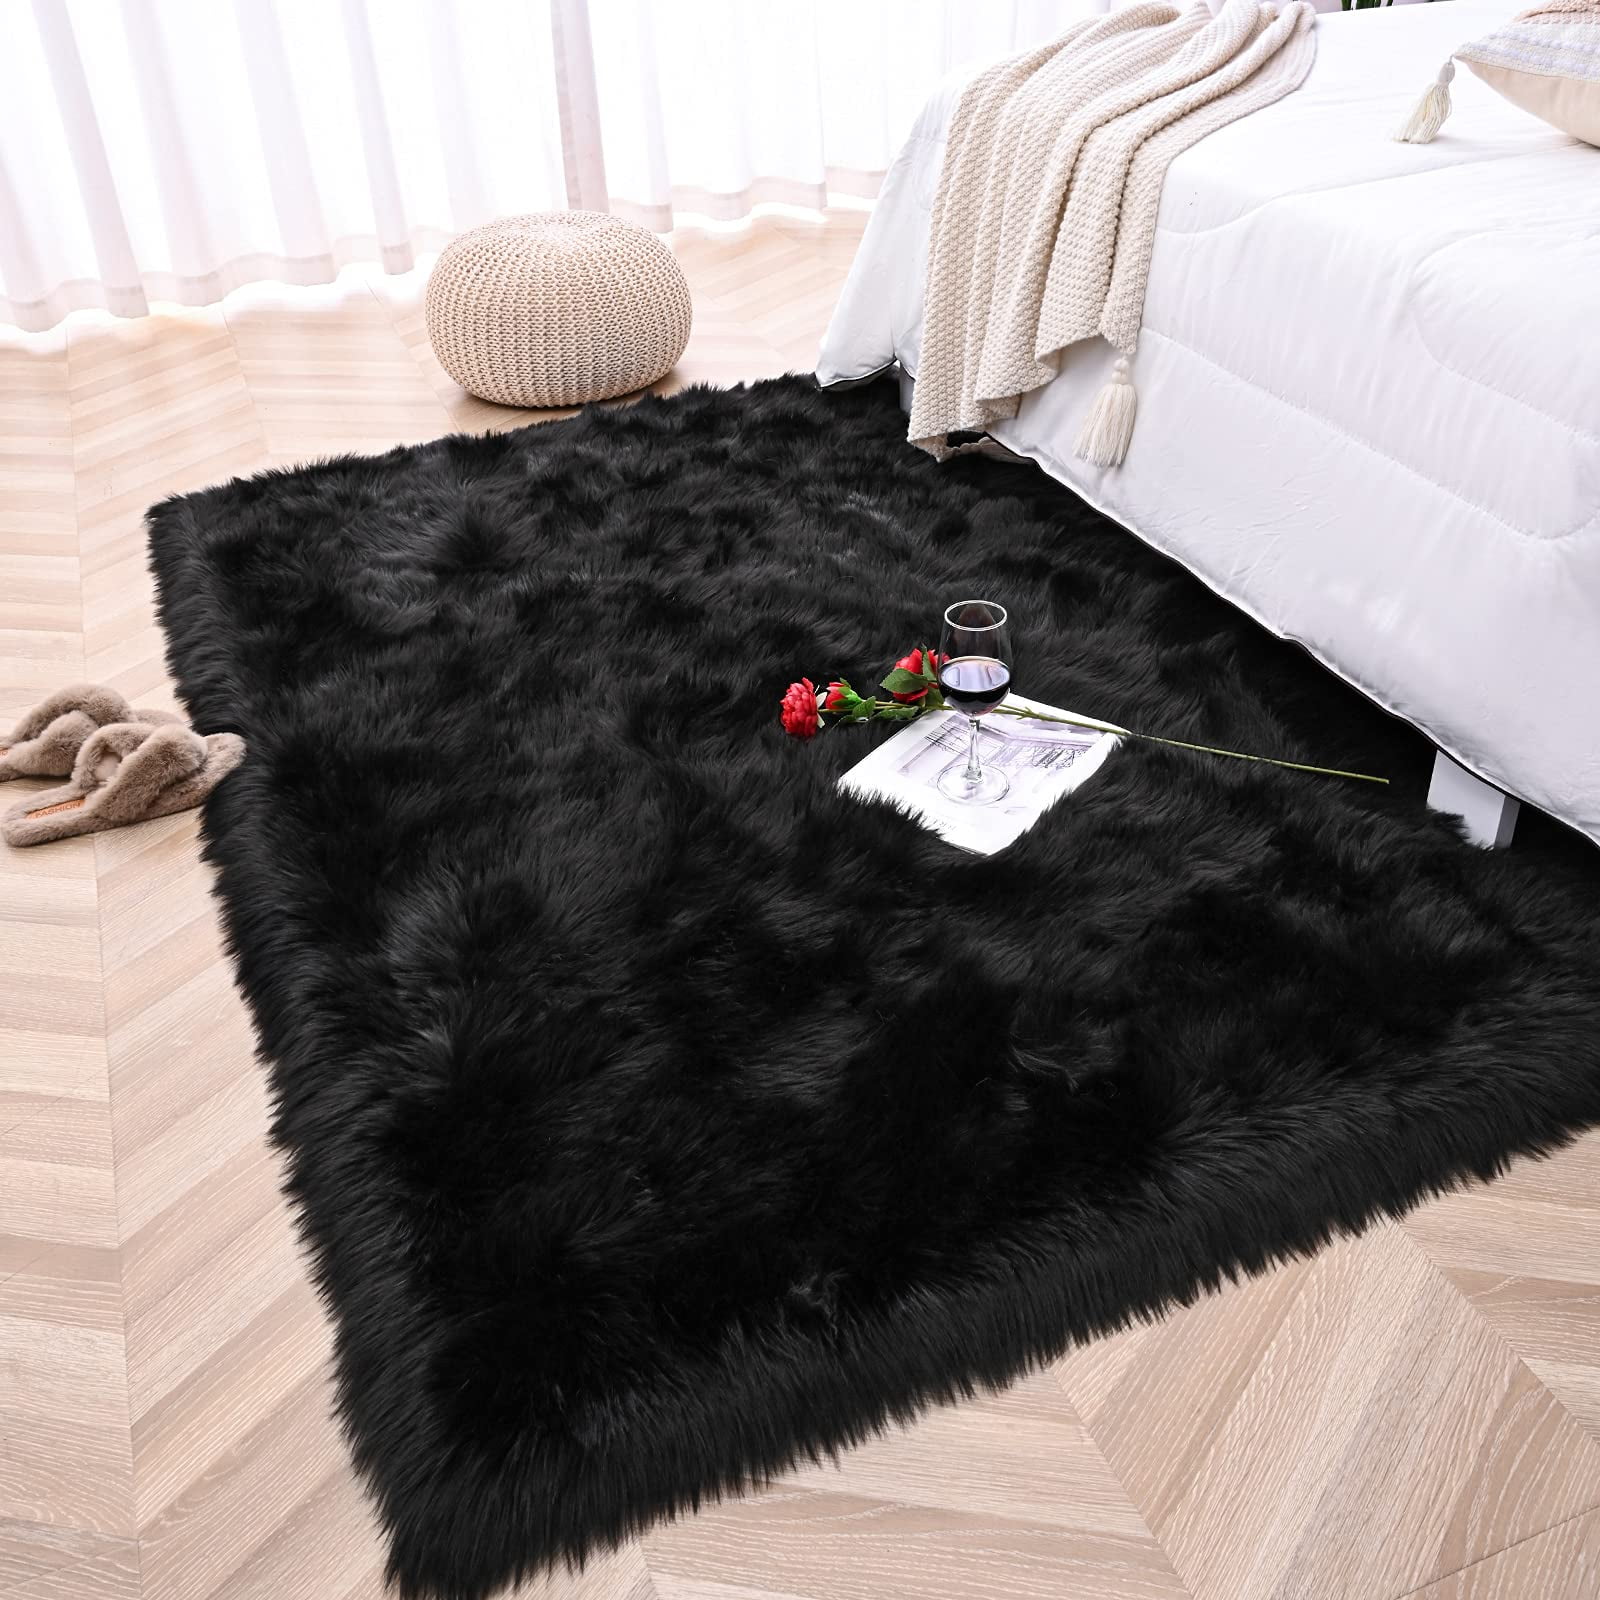 Ghouse 5x5 Soft Grey Faux Fur Round Rug, Machine Washable Area Rugs for  Bedroom Fluffy Rugs for Living Room,Carpet Sheepskin Rug 